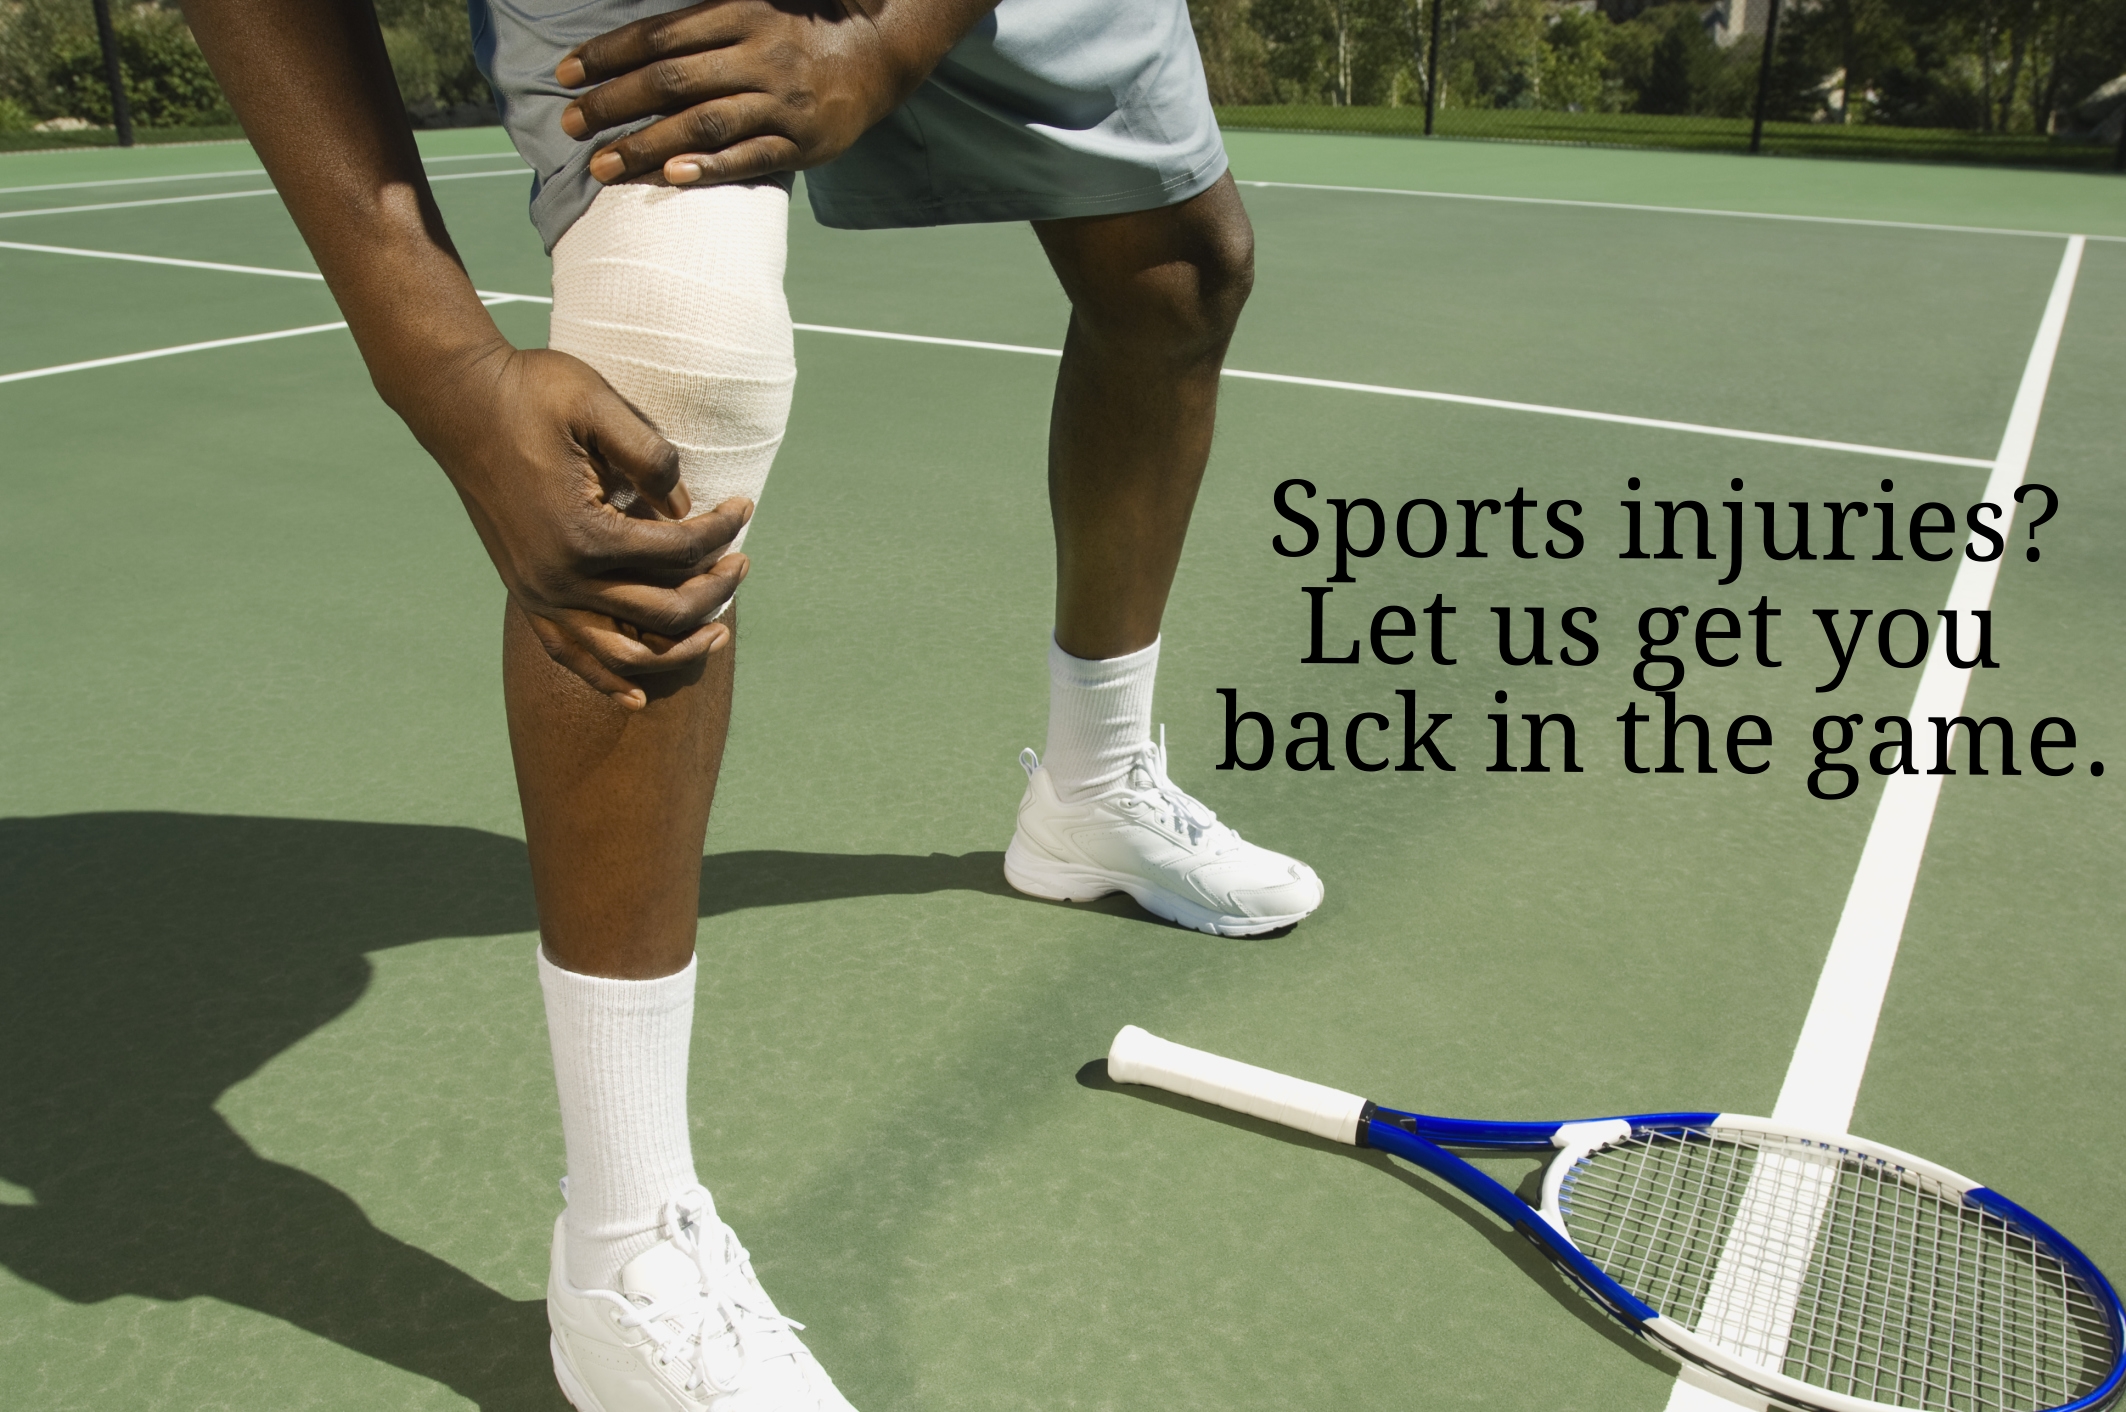 Sports injuries? Let us get you back into the game (A tennis player holds his injured and wrapped knee).